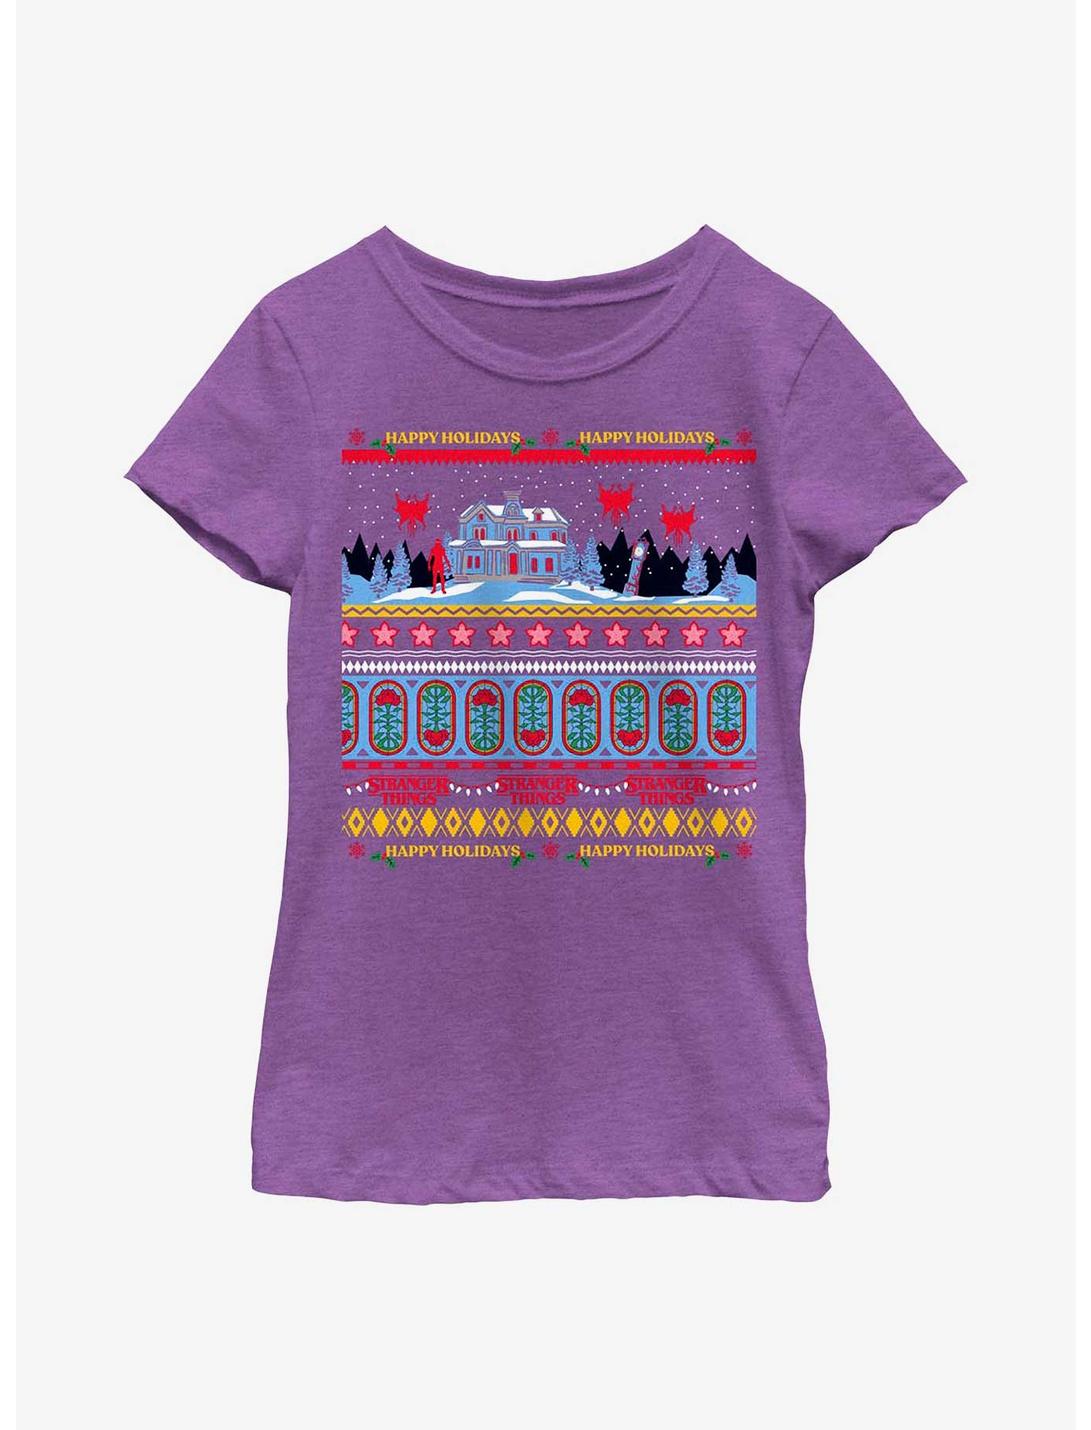 Stranger Things Creel House Ugly Sweater Youth Girls T-Shirt, PURPLE BERRY, hi-res